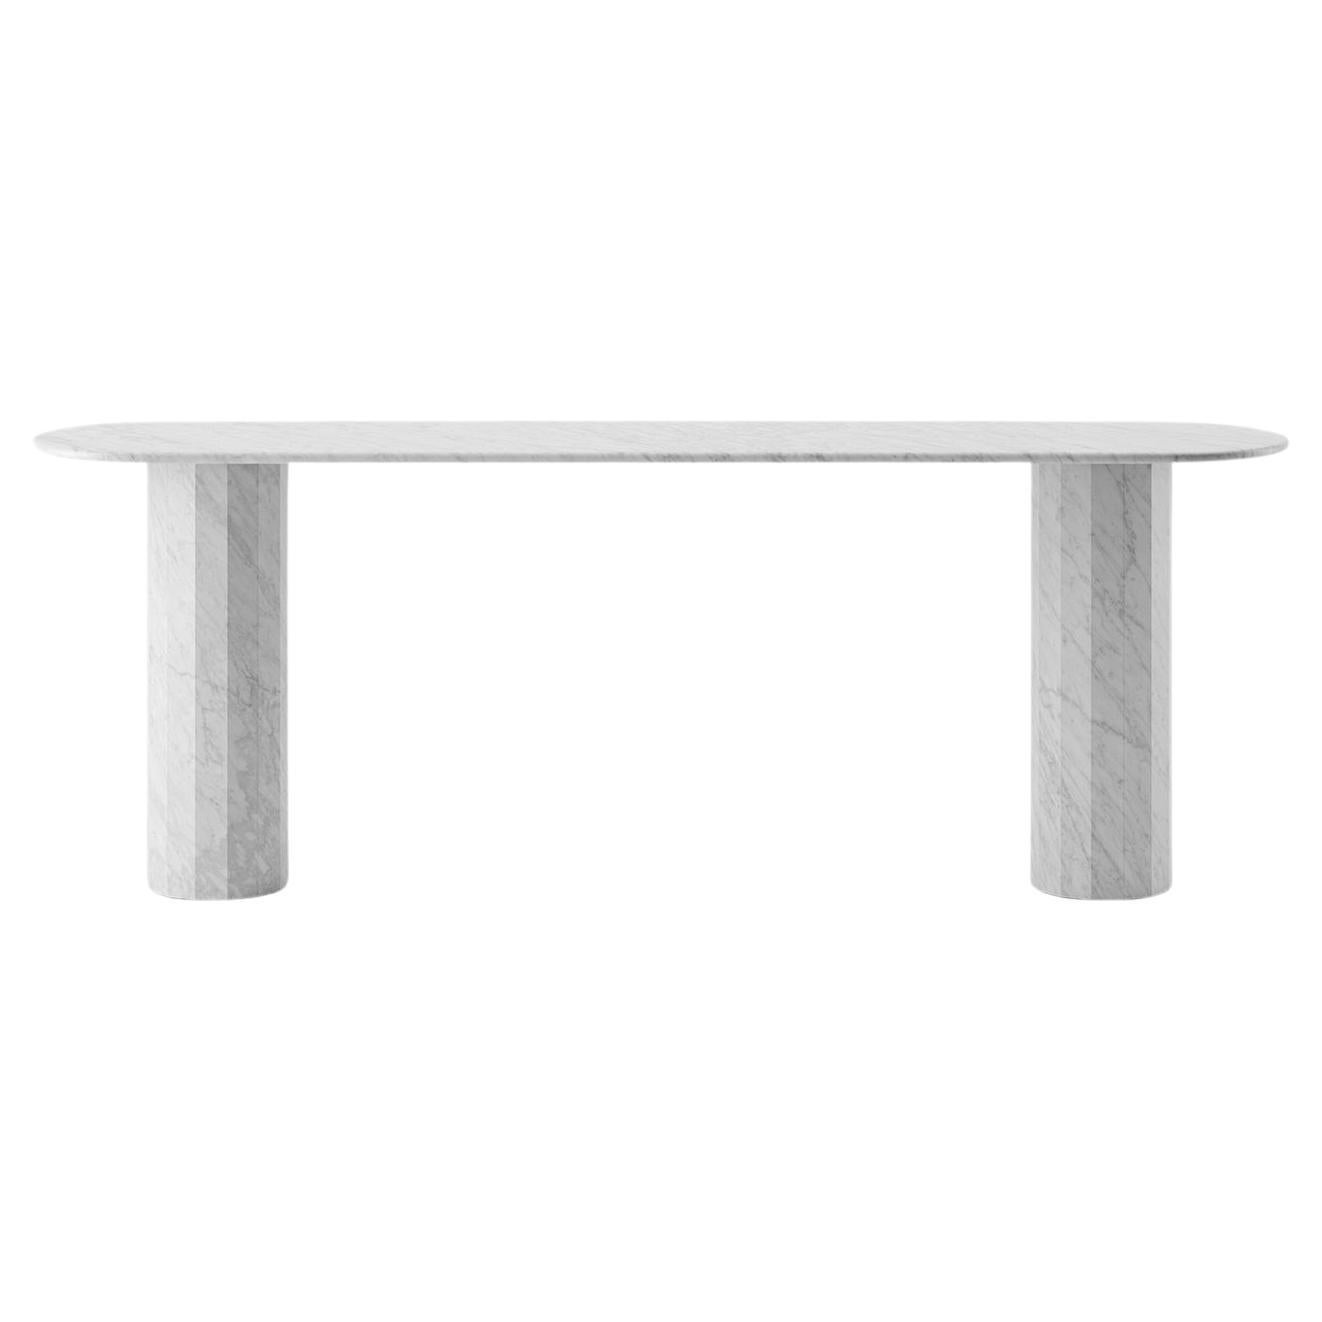 Ashby Console Handcrafted in Bianco Carrara Marble by Lemon For Sale